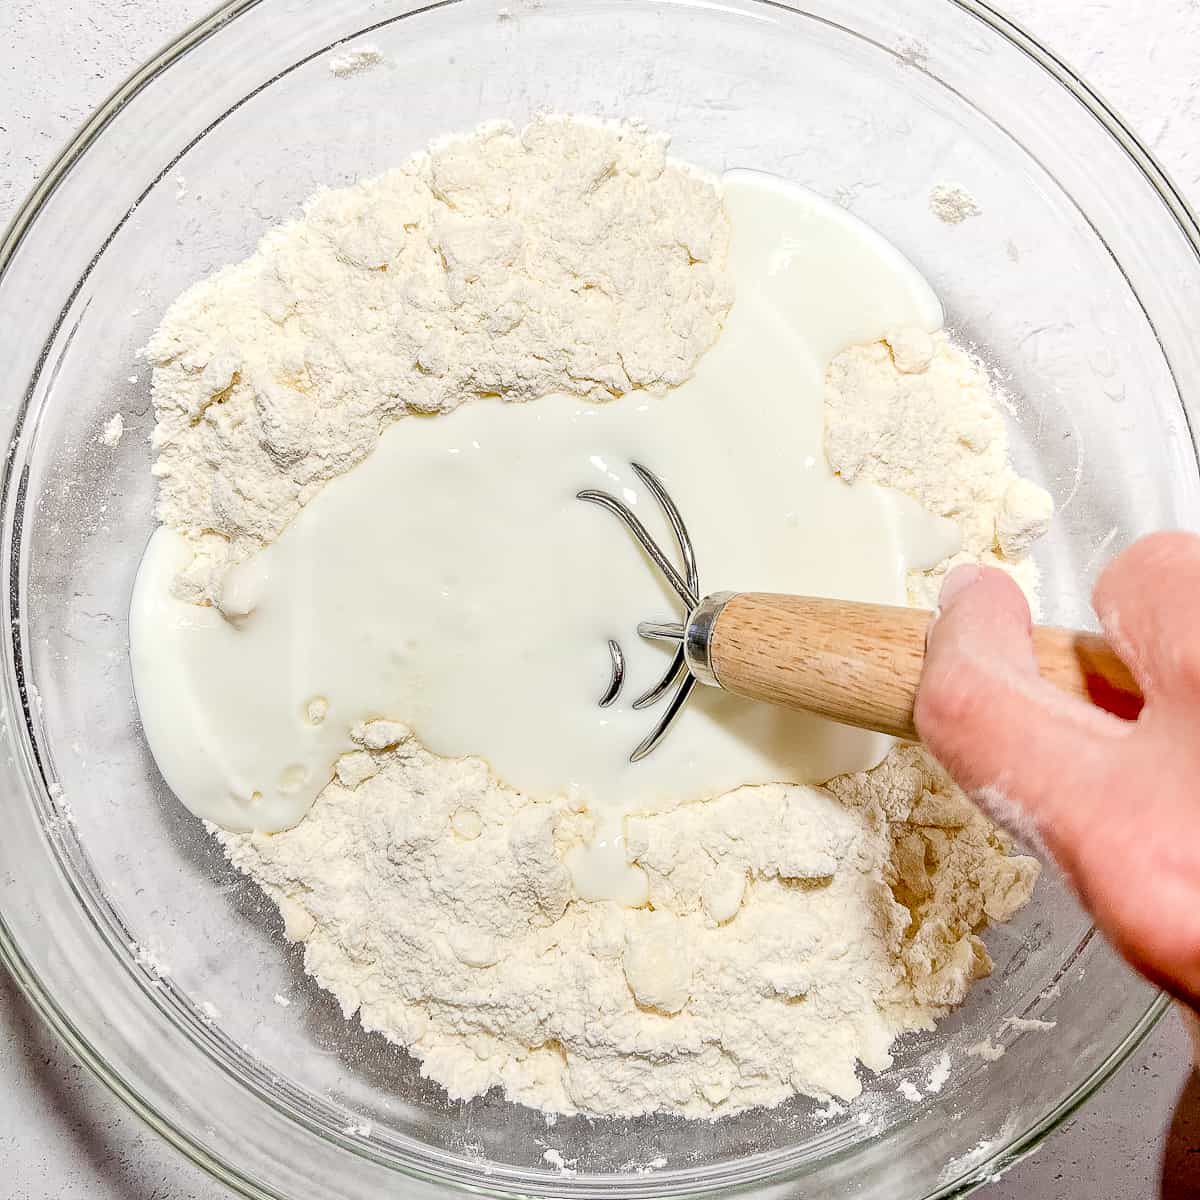 mixing butter into flour and butter mixture for biscuits.